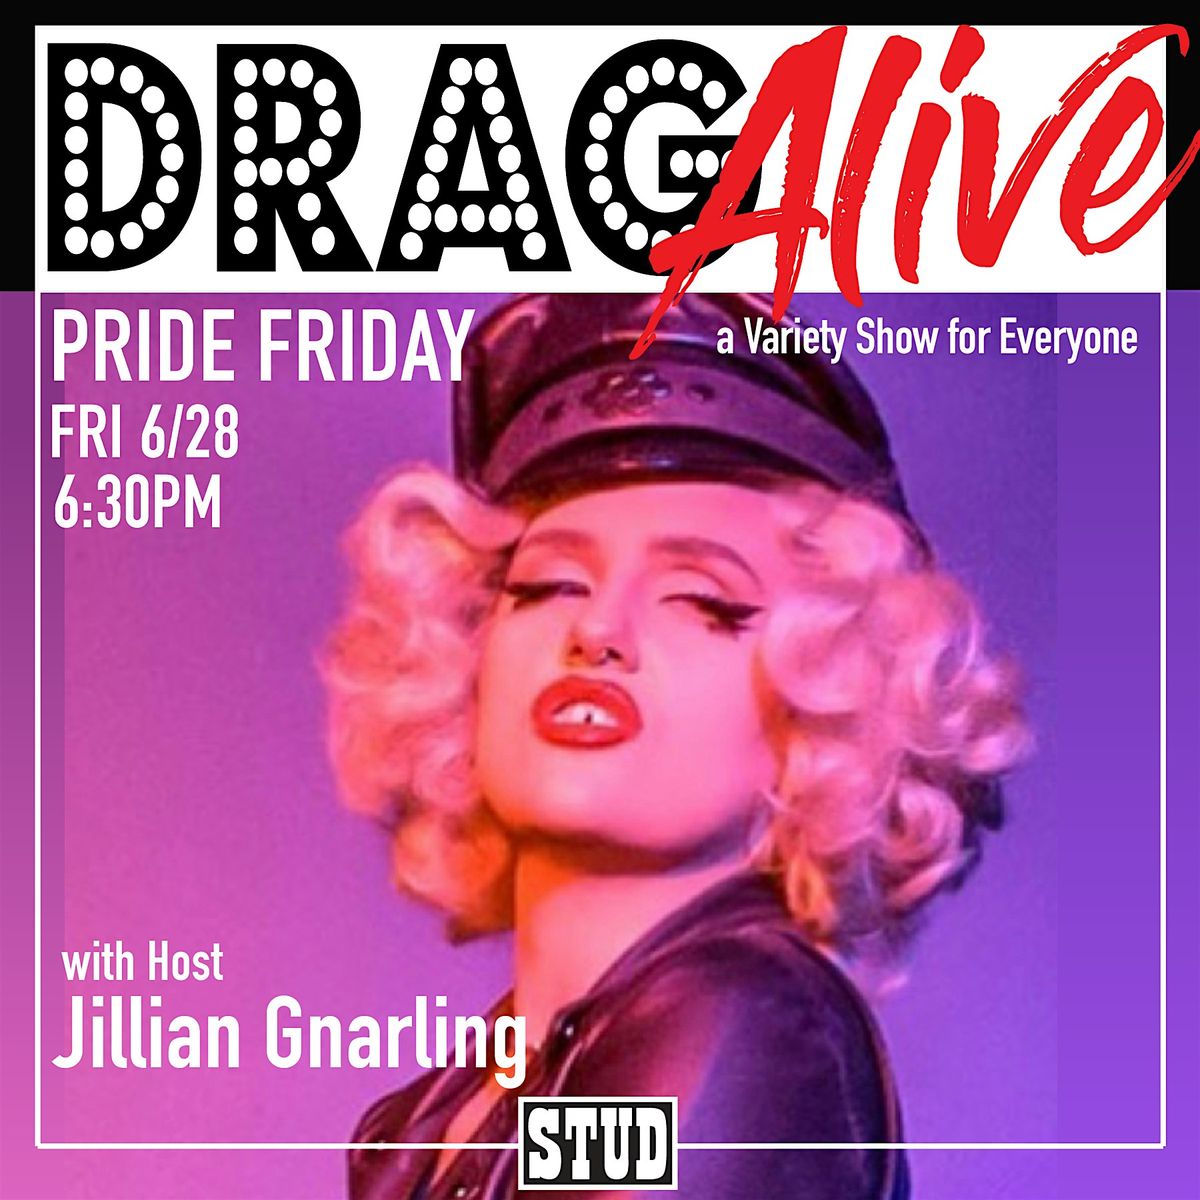 Drag Alive! at the Stud with Jillian Gnarling